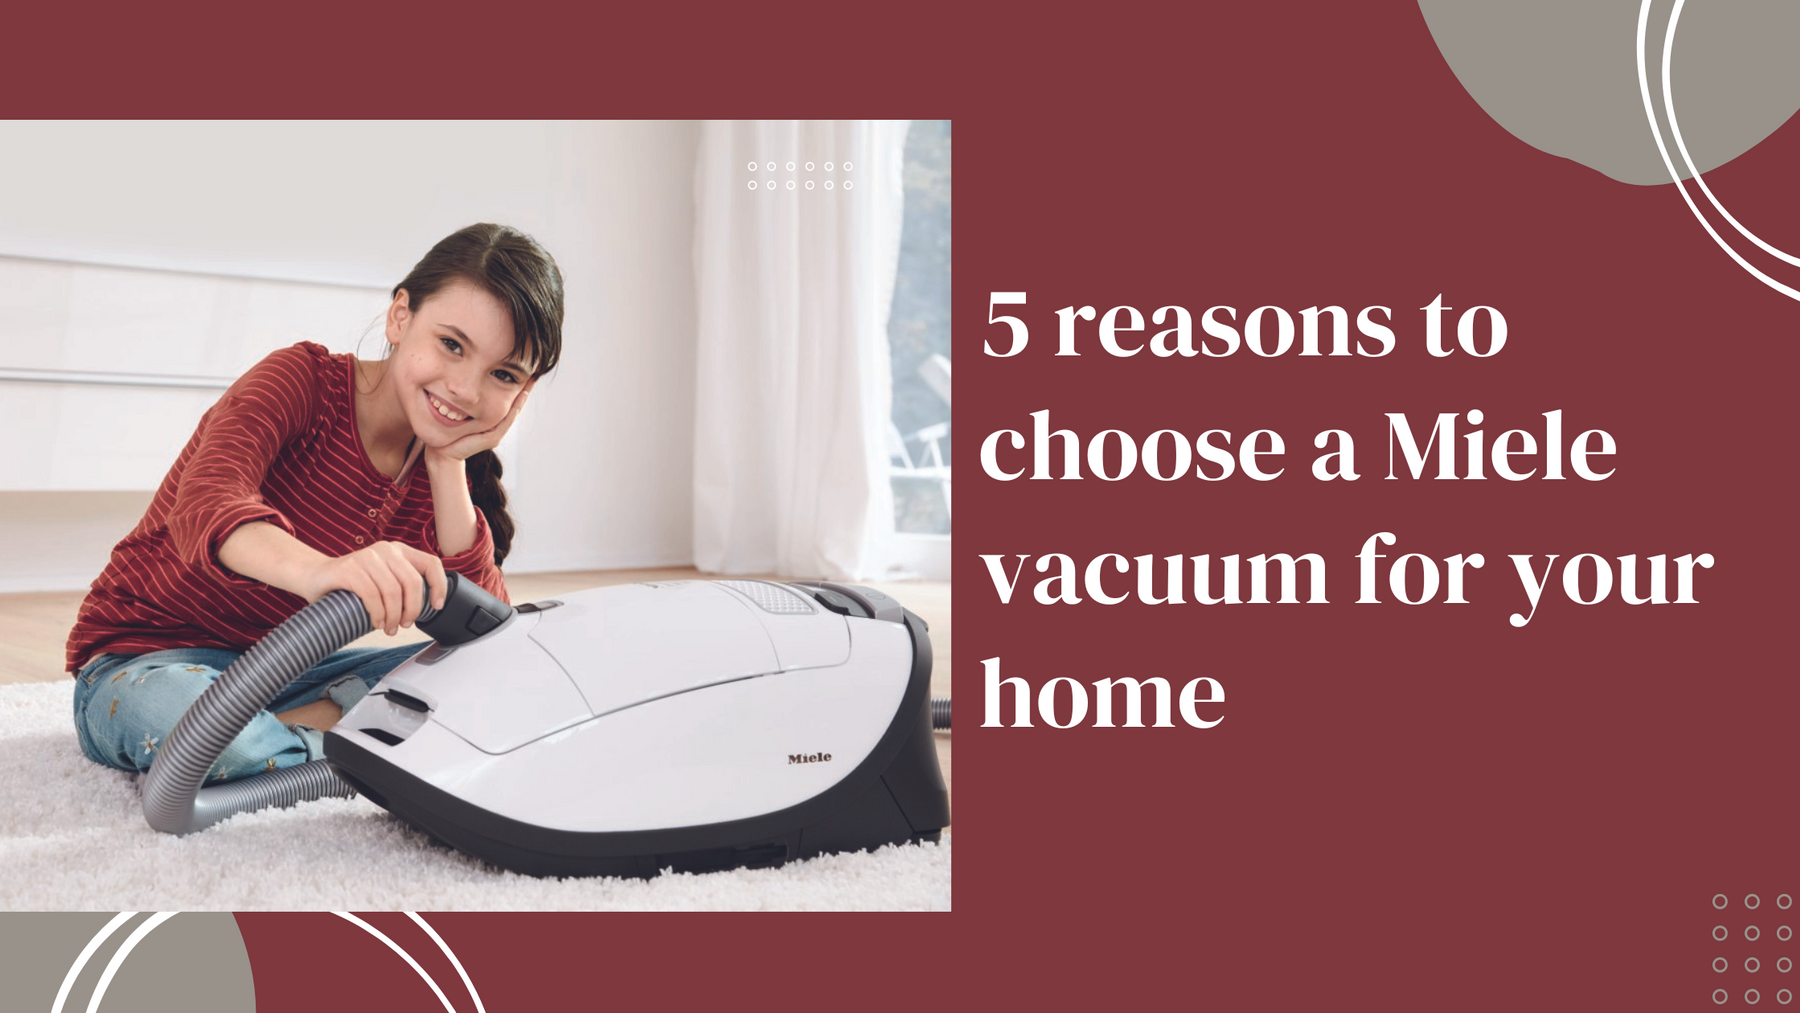 5 reasons to choose a Miele vacuum for your home